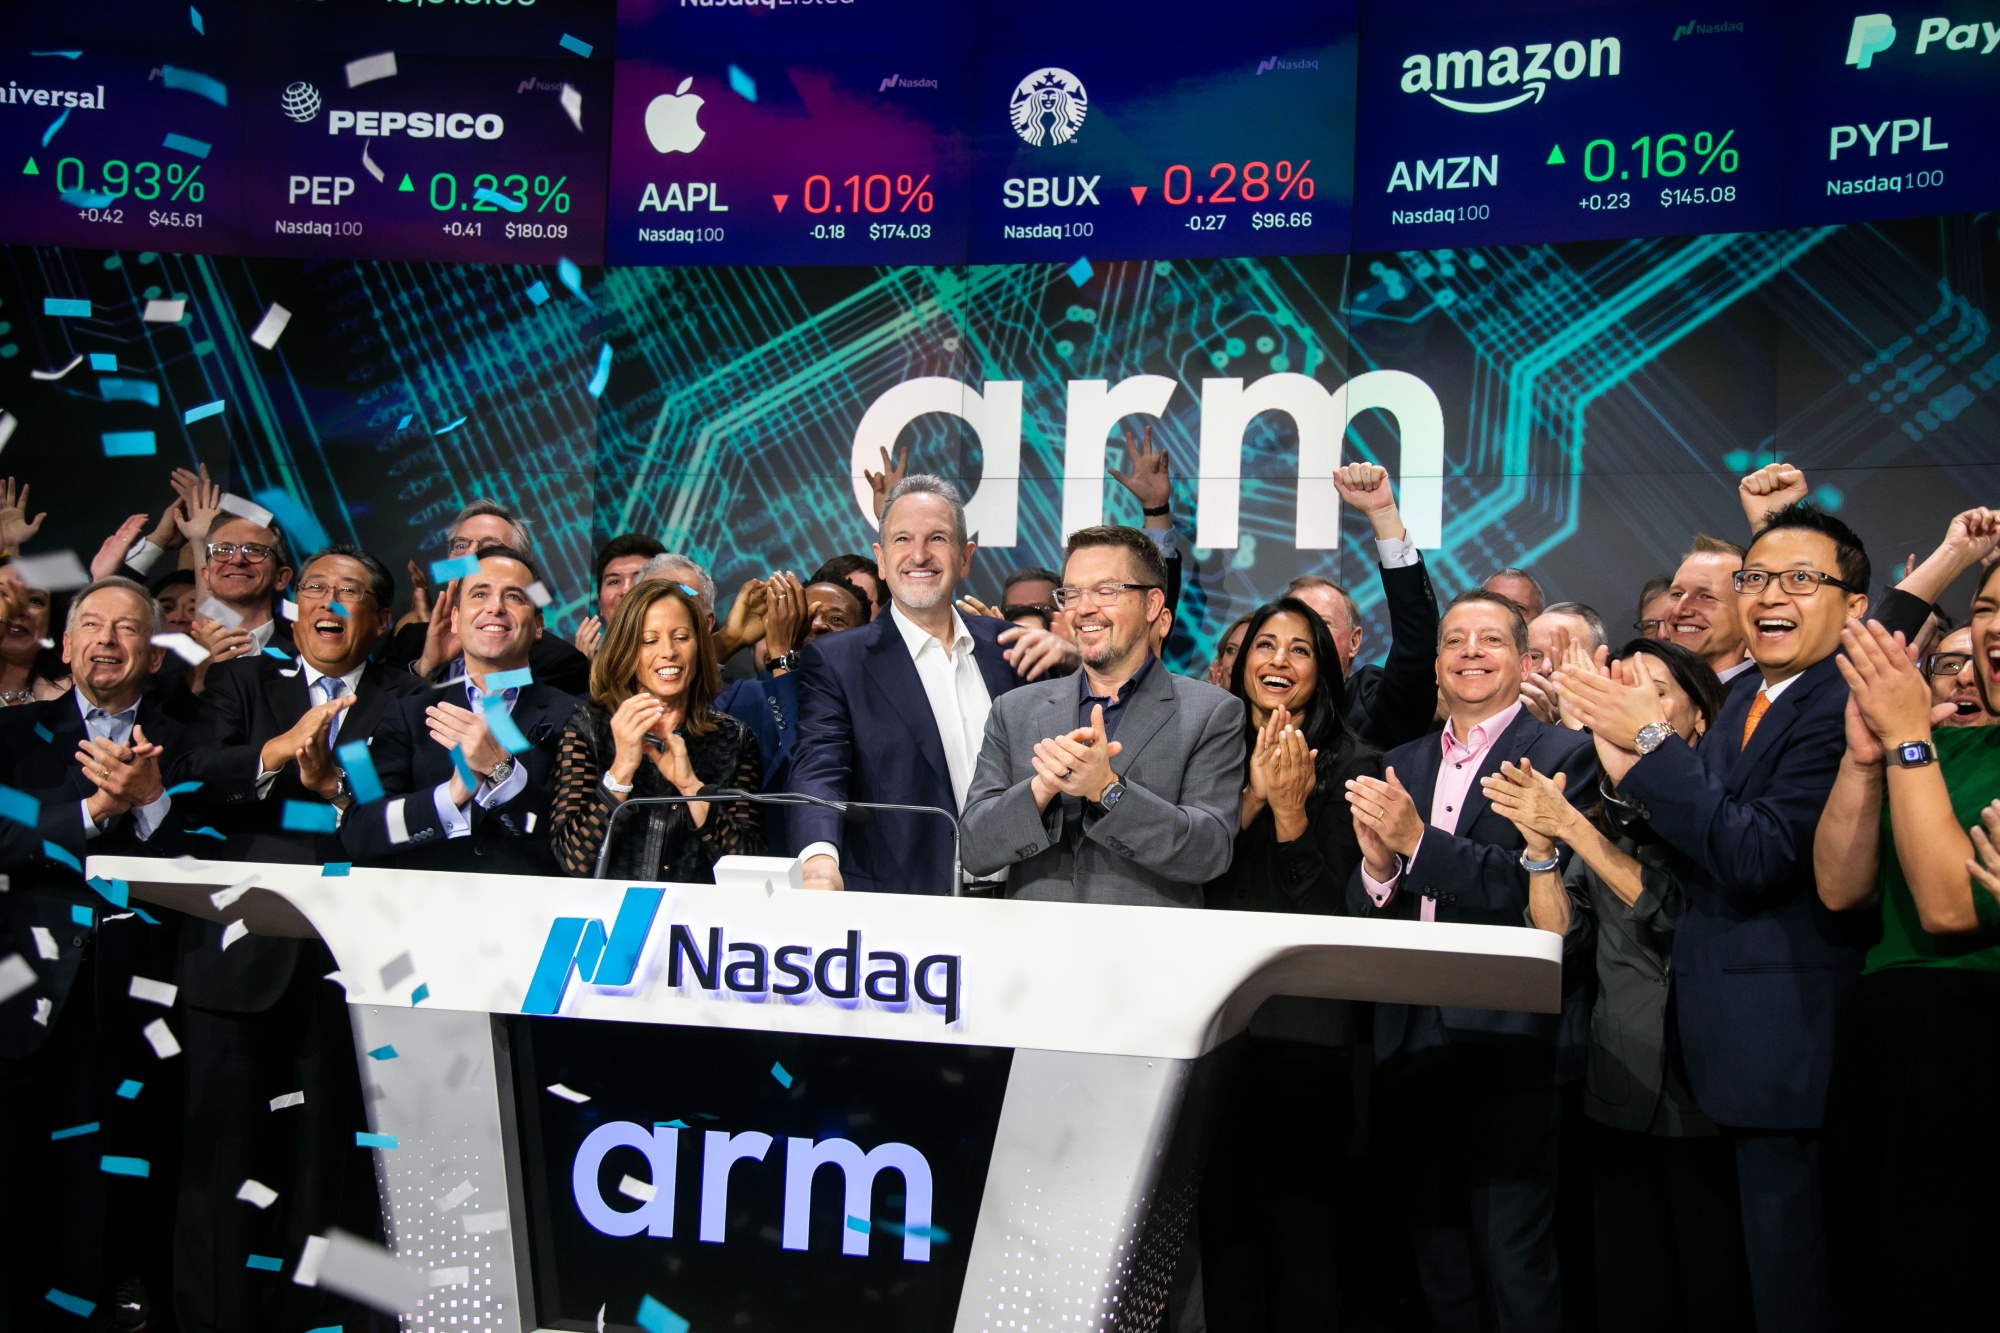 Arm IPO, Instacart IPO: How to Invest in an IPO - Bloomberg